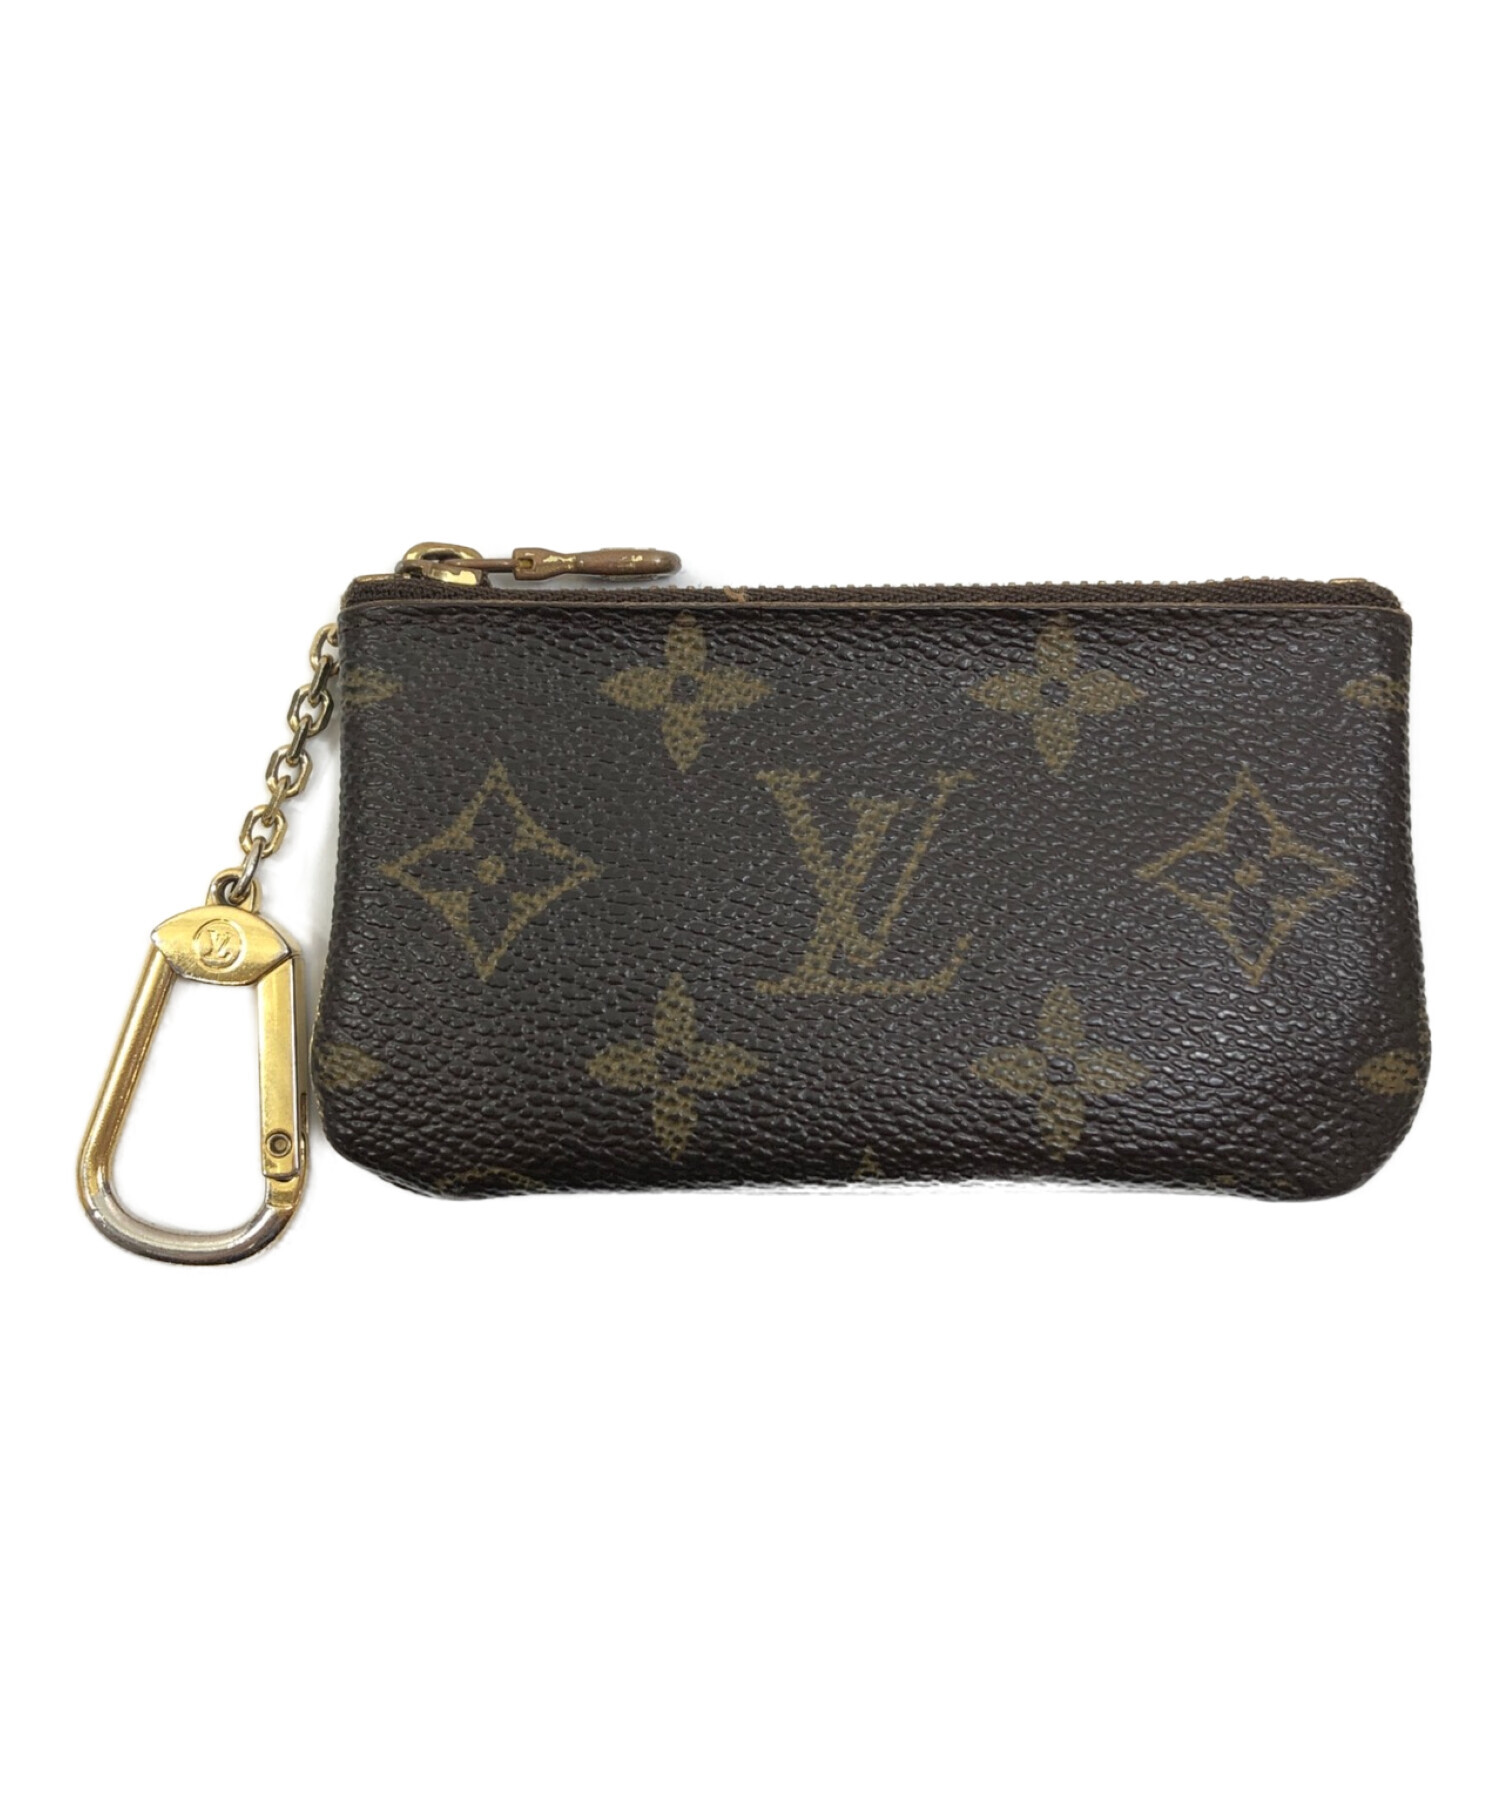 LOUIS VUITTON ルイヴィトン  ポシェットクレ  コインケース